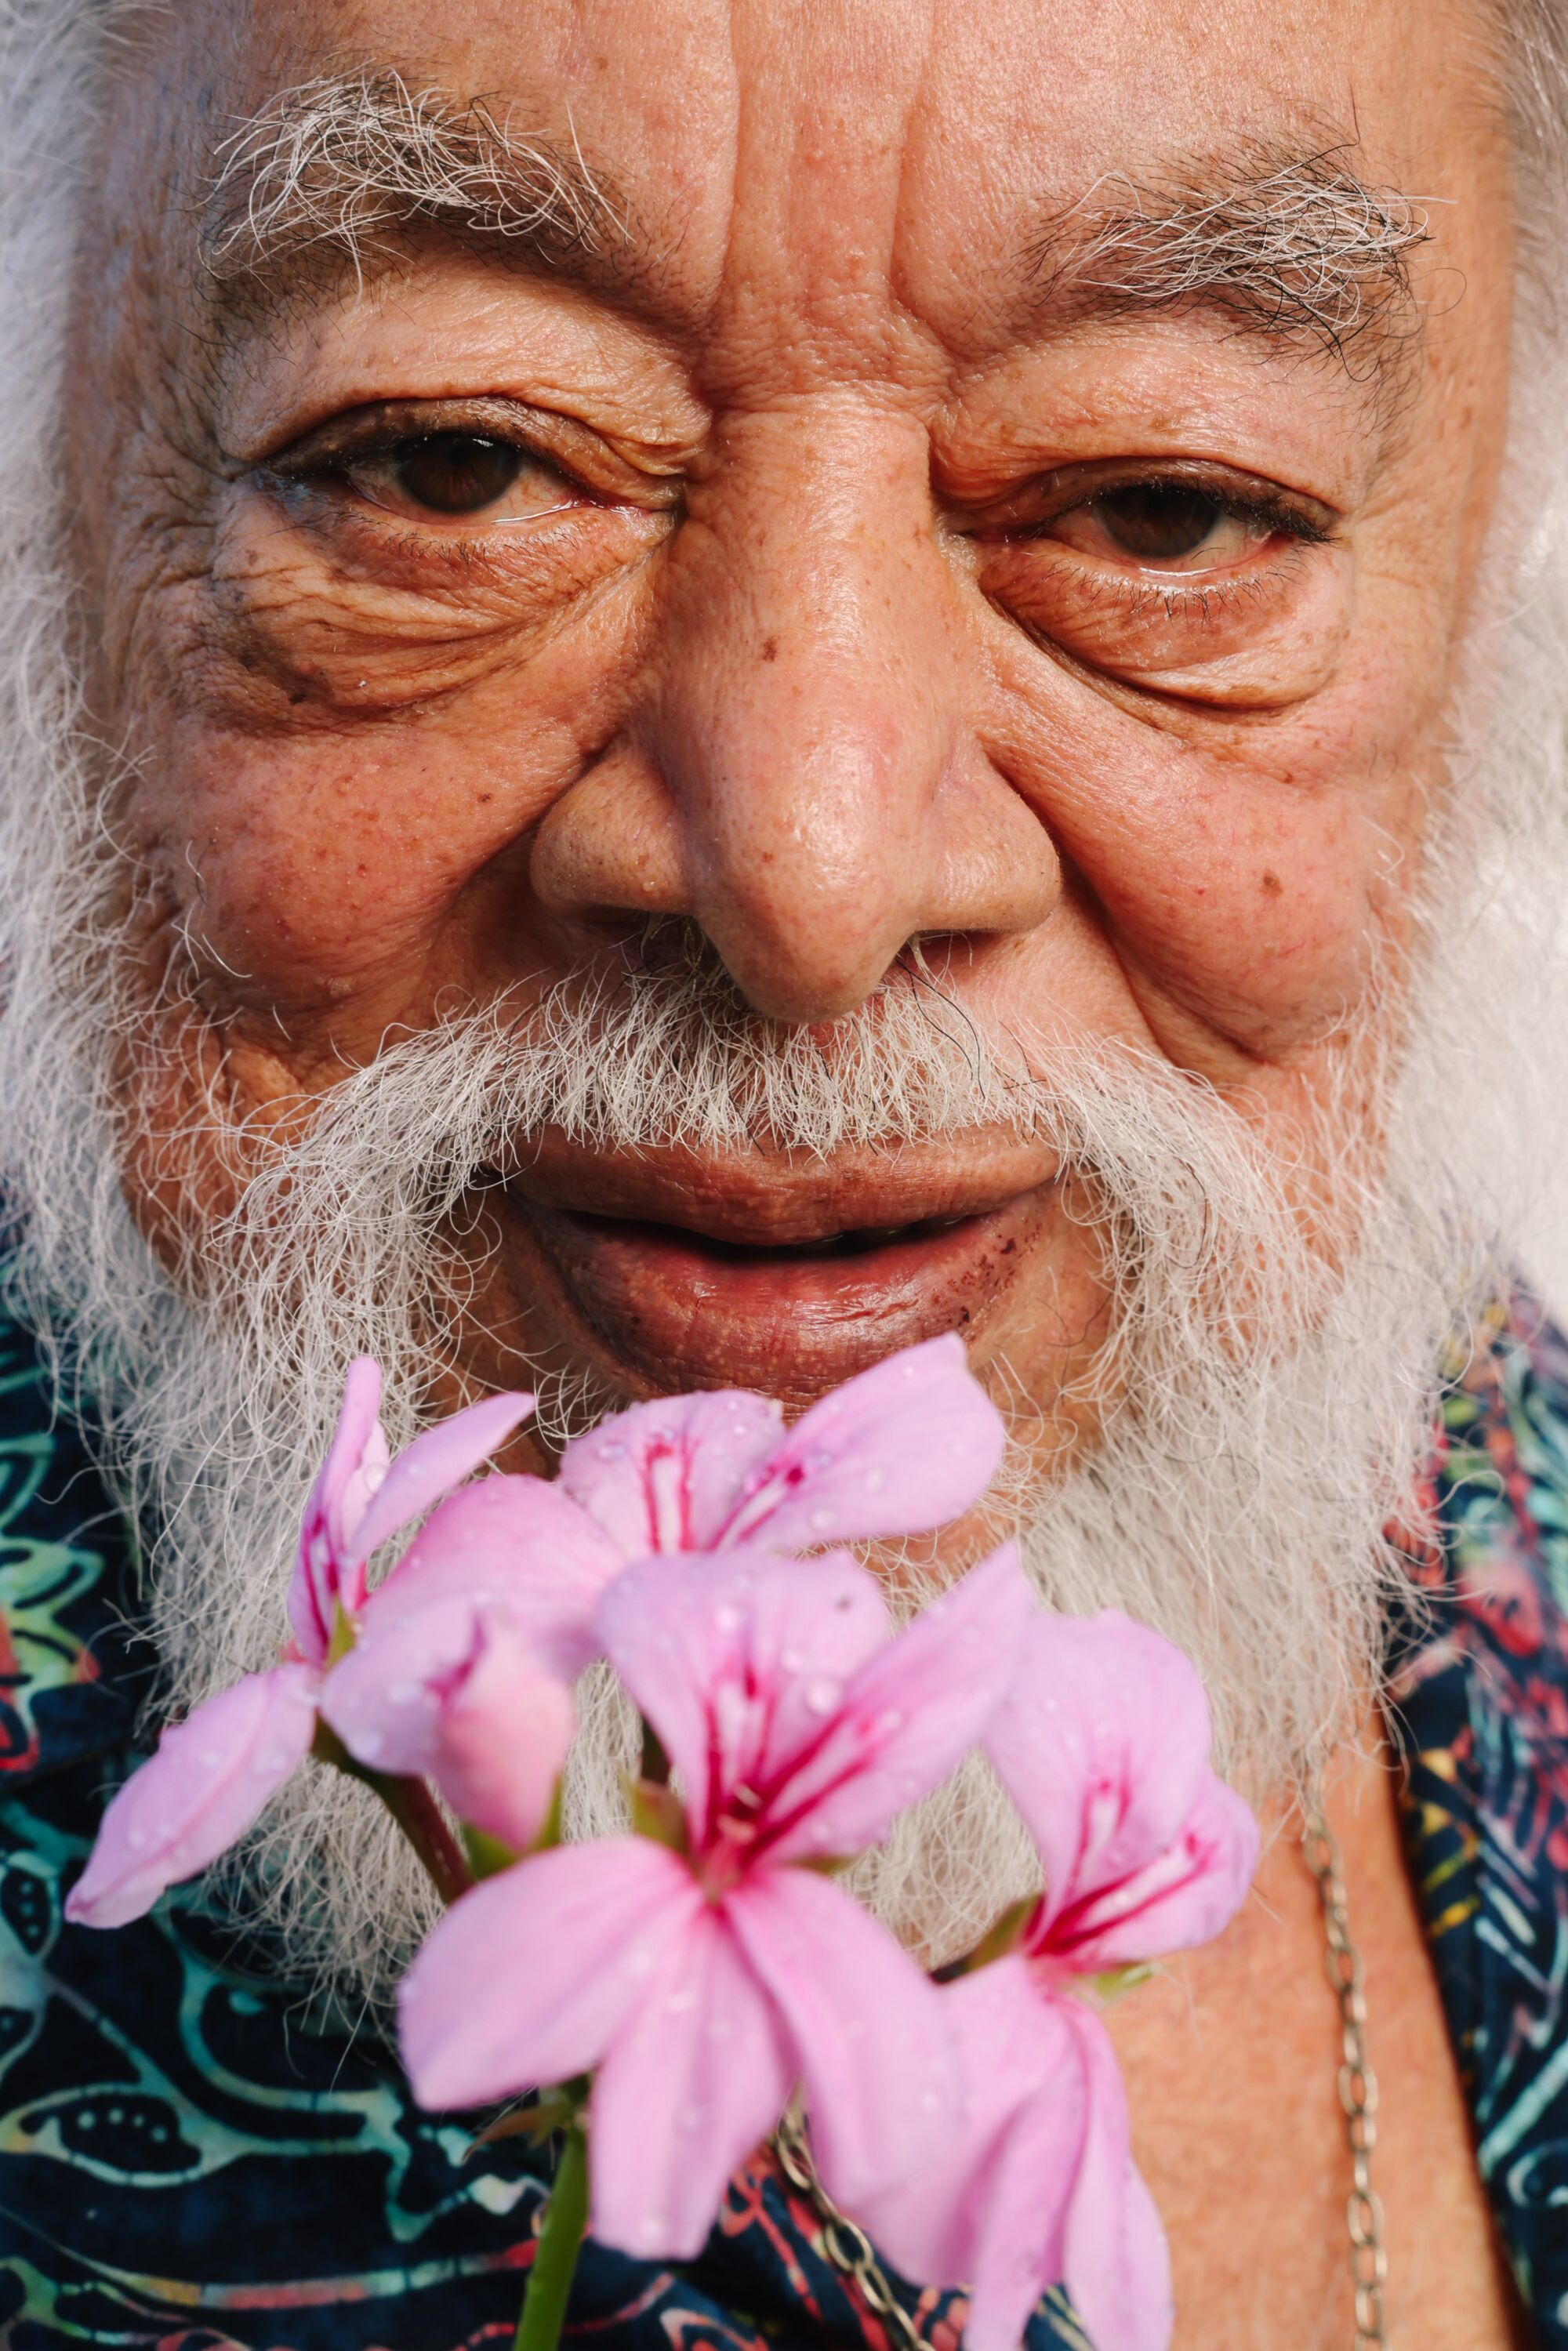 A close up of a man's face holding a flower.